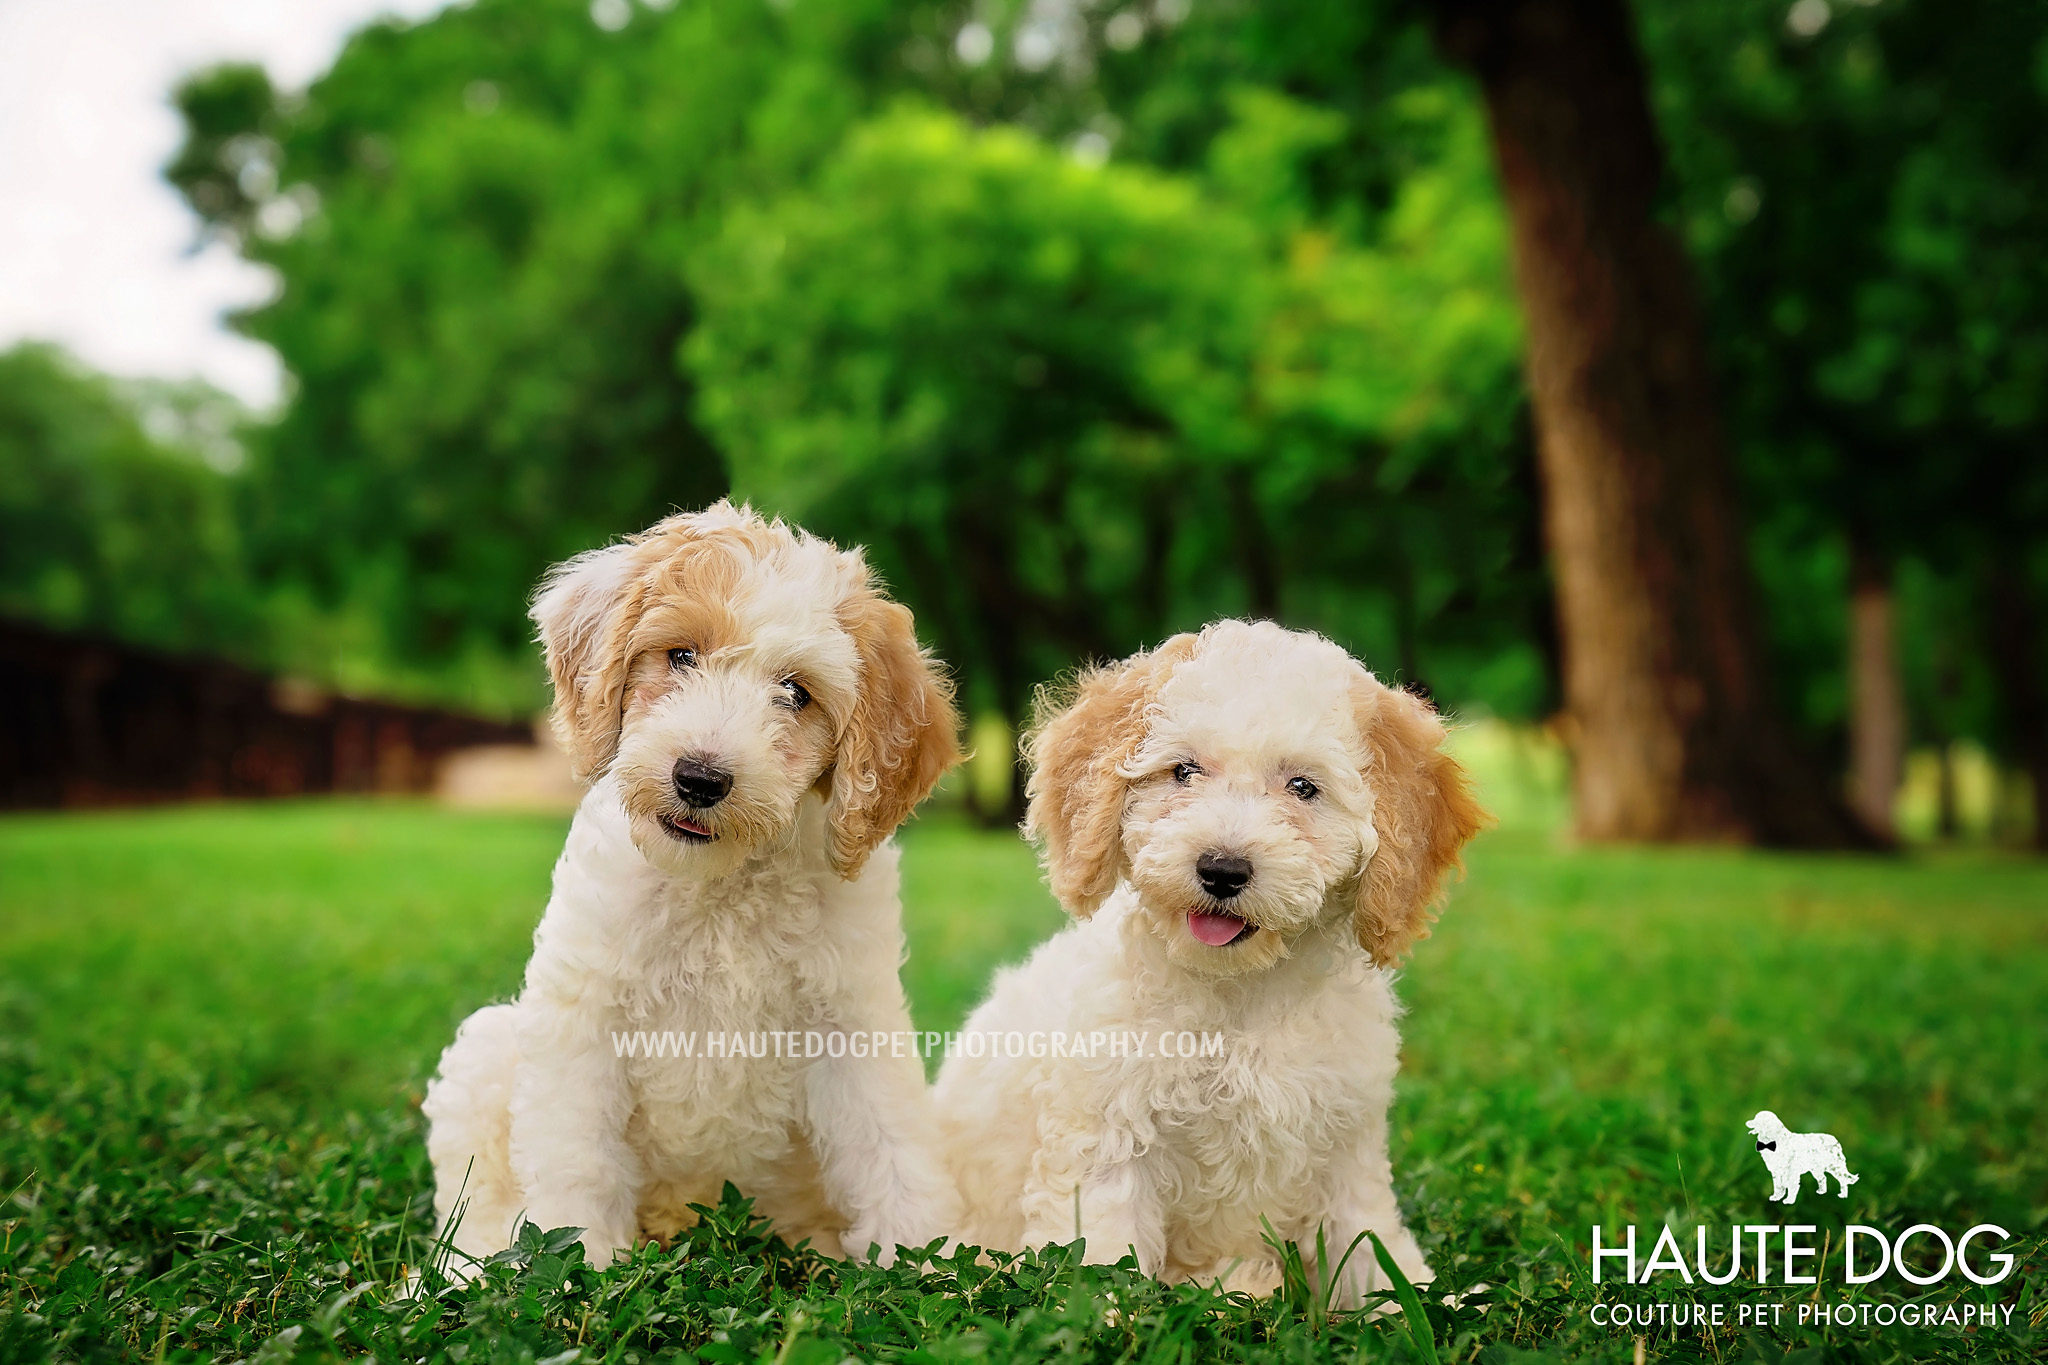 Two curly doodle puppies sit in the grass with inquisitive expressions.